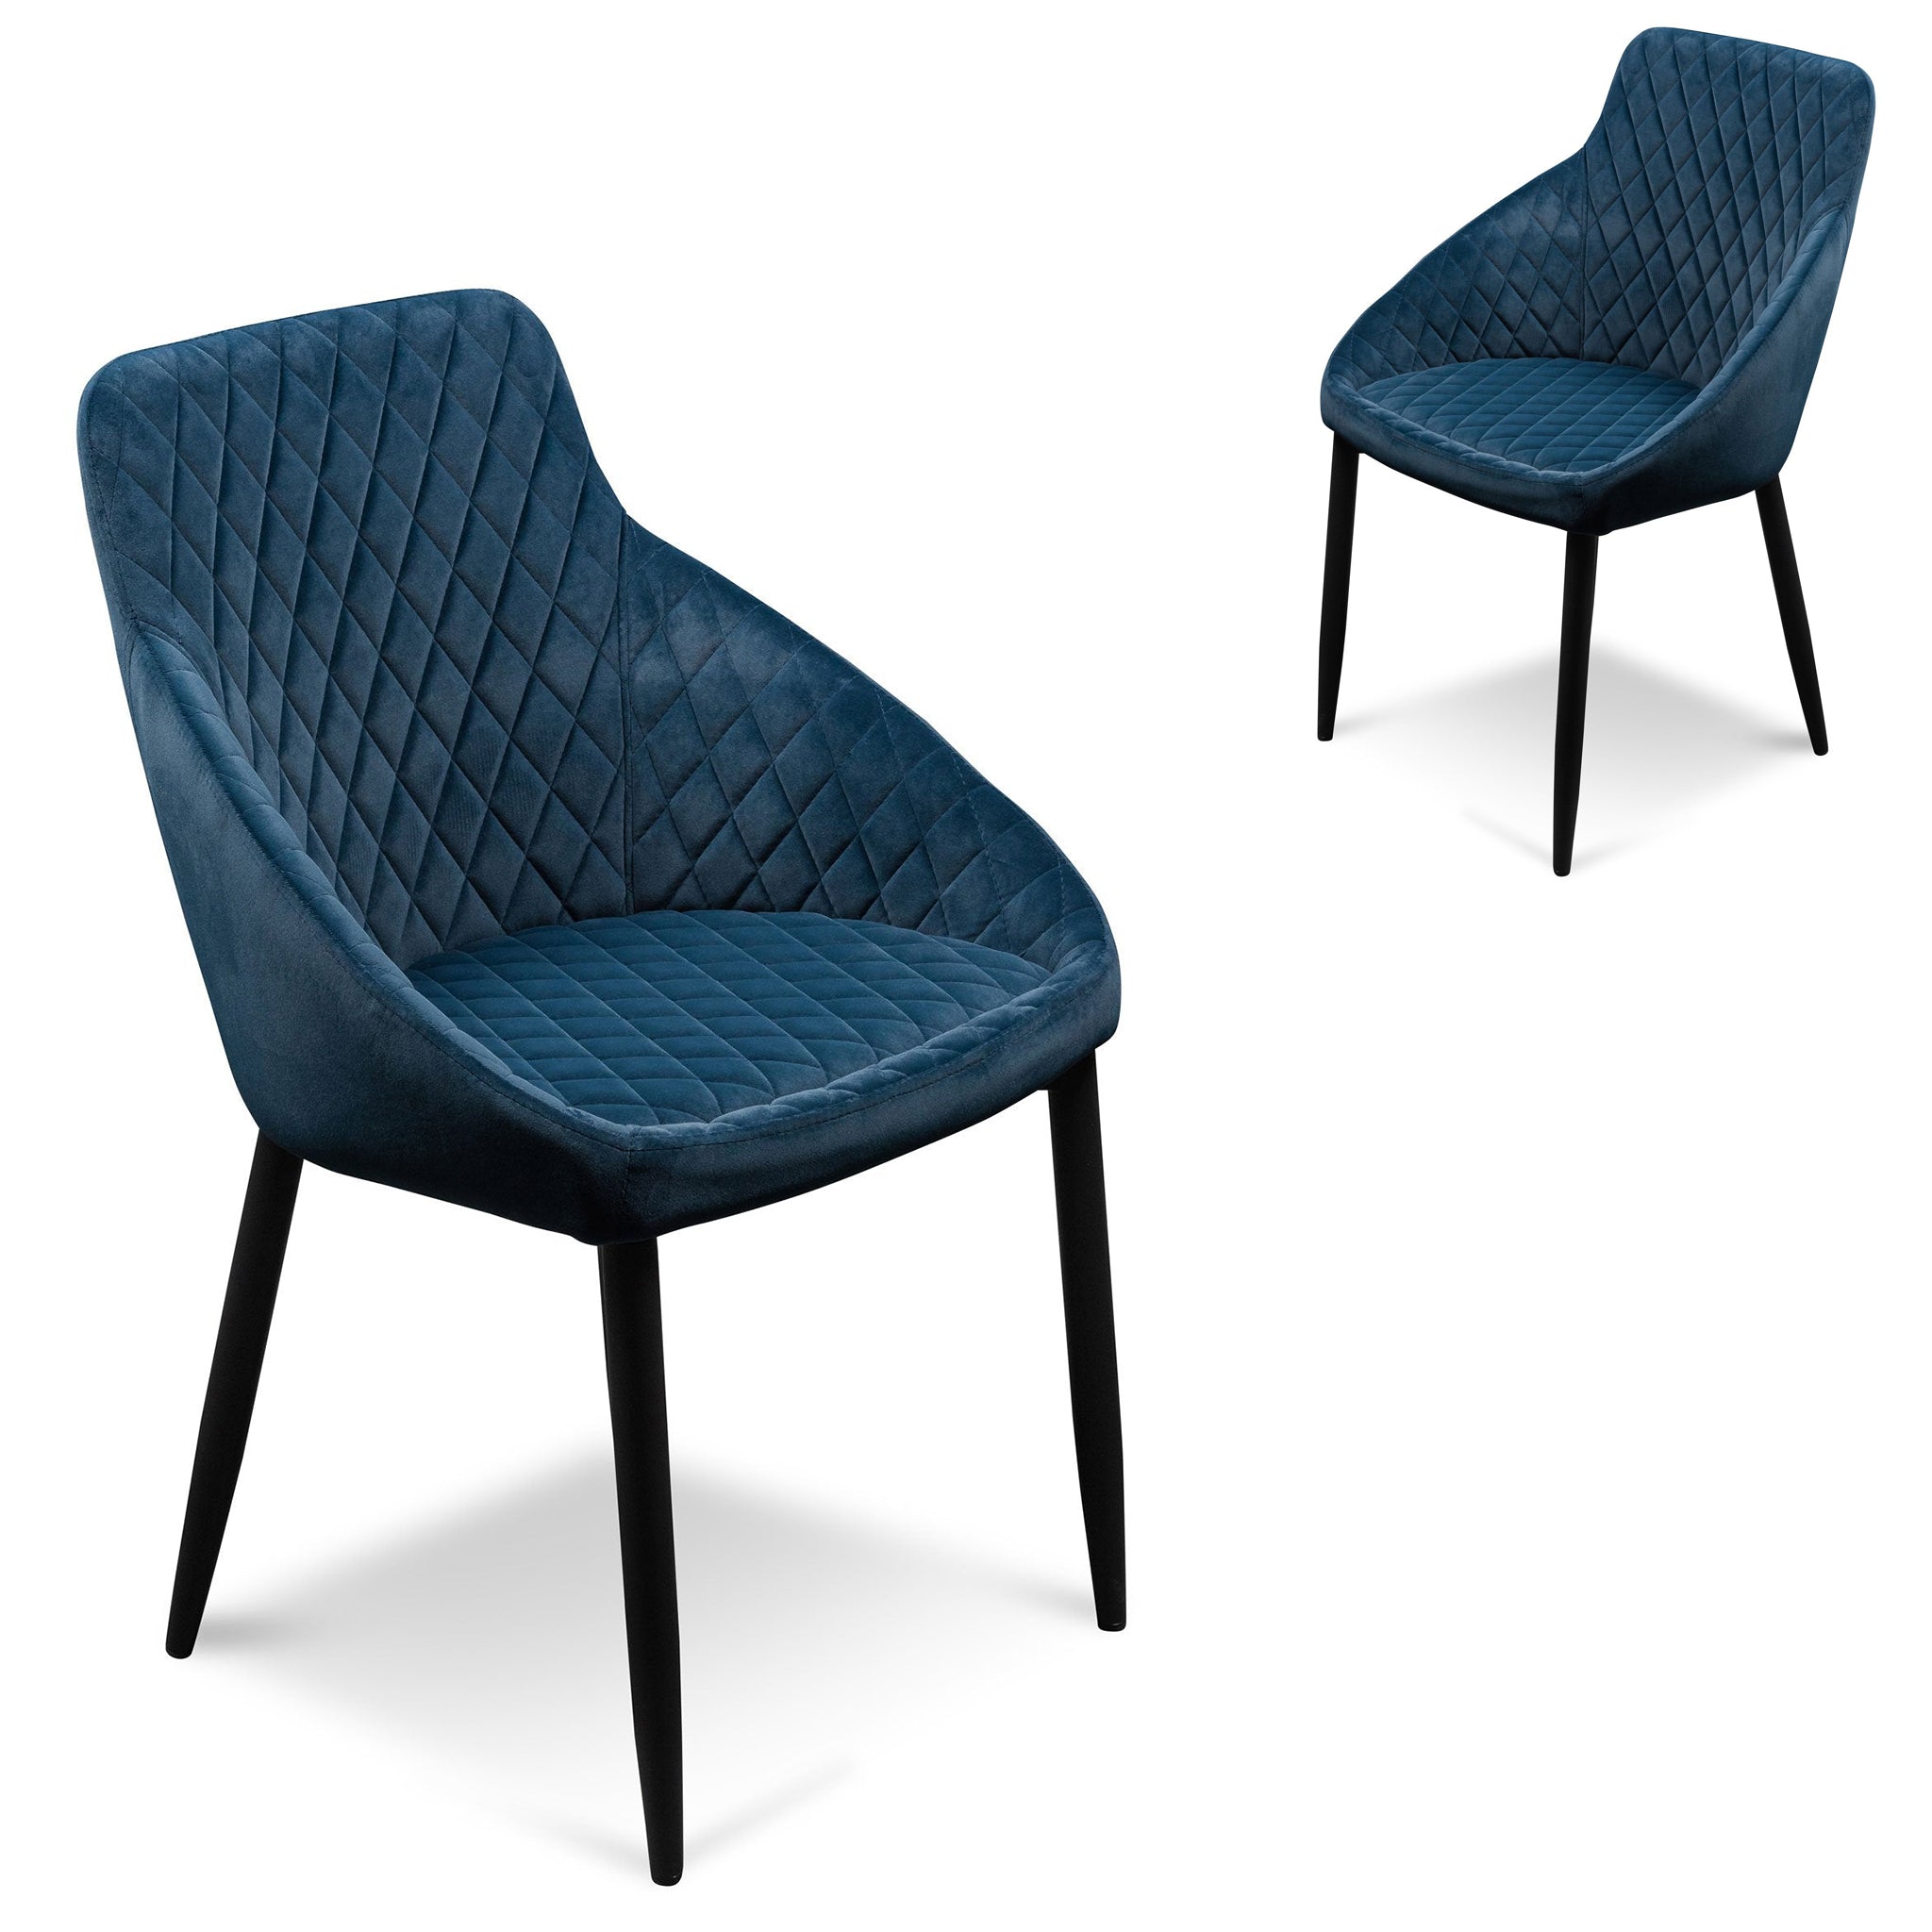 Set of 2 Rome Dining Chair - Navy Blue Velvet - Dining Chairs